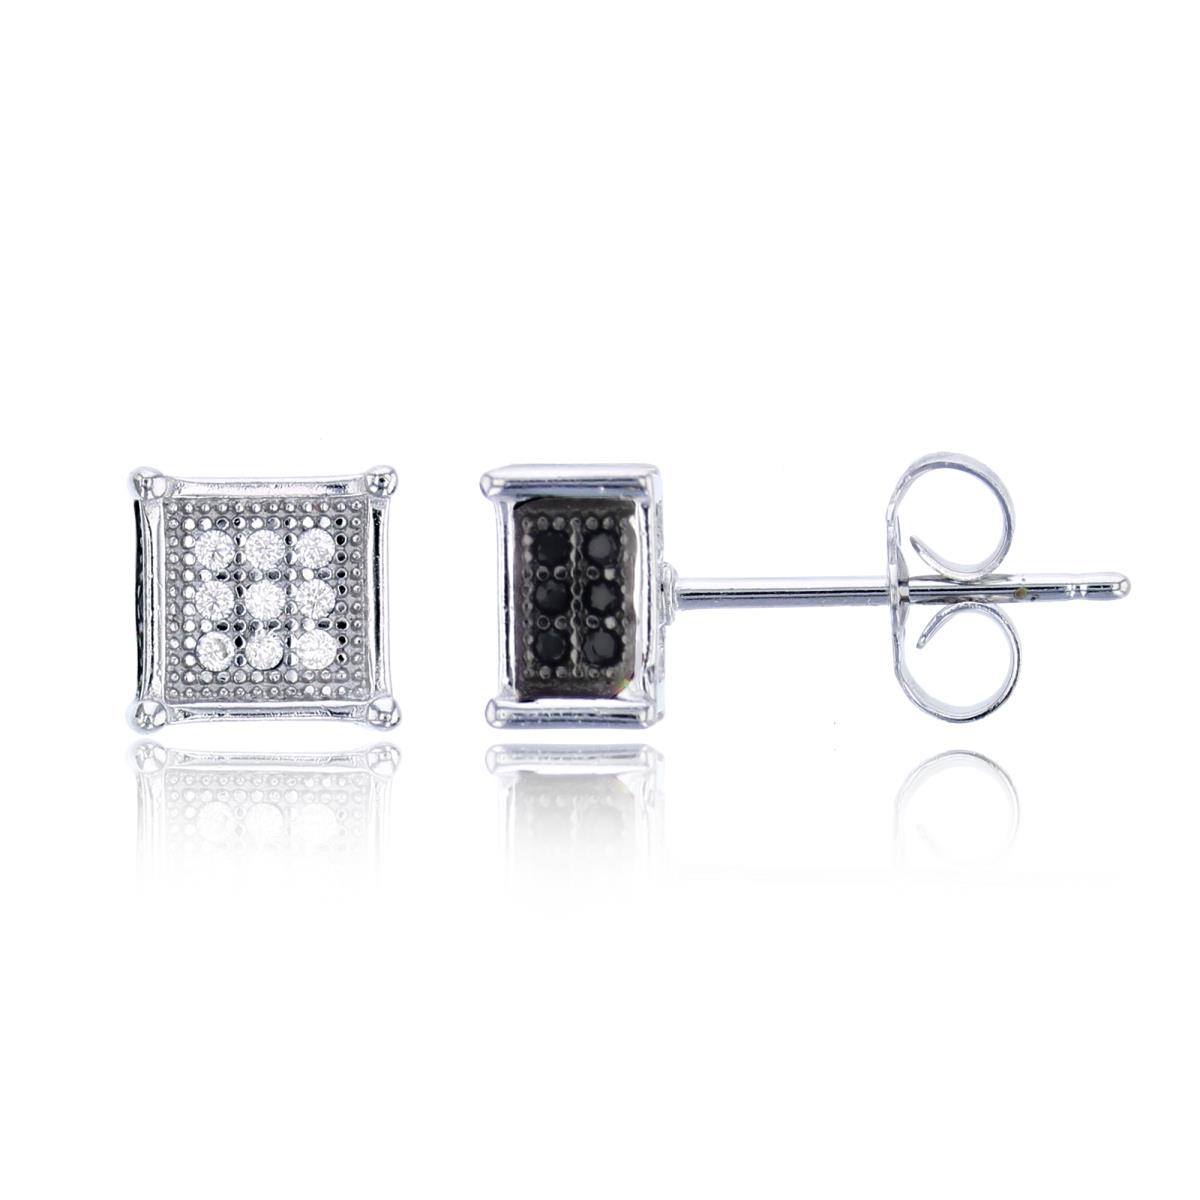 Sterling Silver Black & White 7x7 Micropave 3D Square Stud